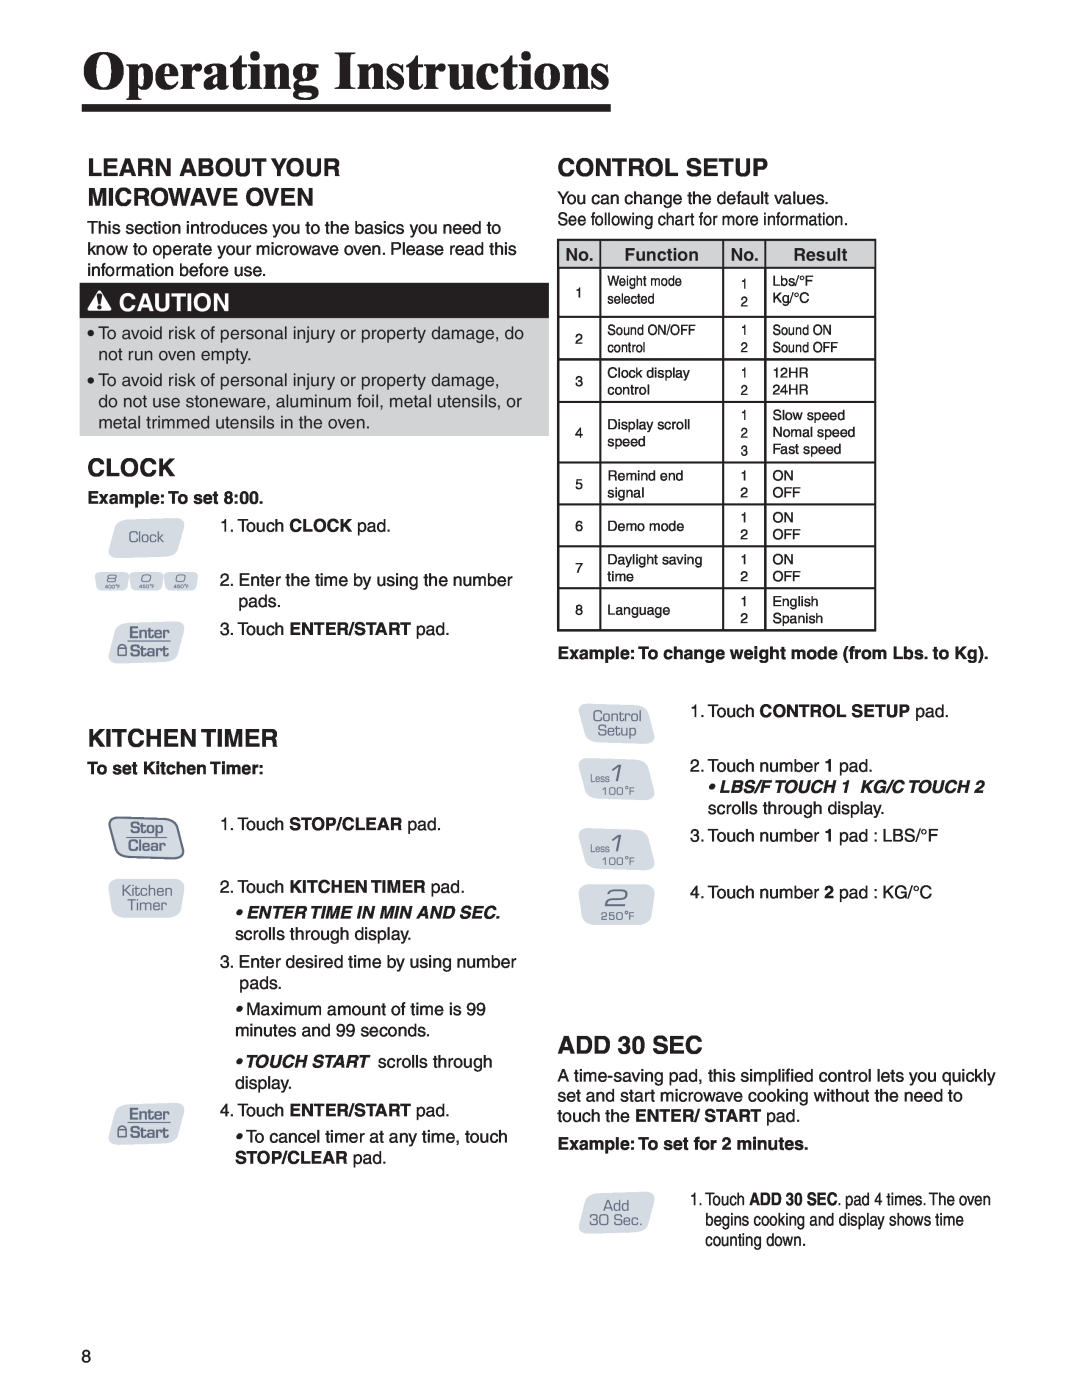 Amana AMC6158BAB Operating Instructions, Learn About Your Microwave Oven, Clock, Kitchen Timer, Control Setup, ADD 30 SEC 